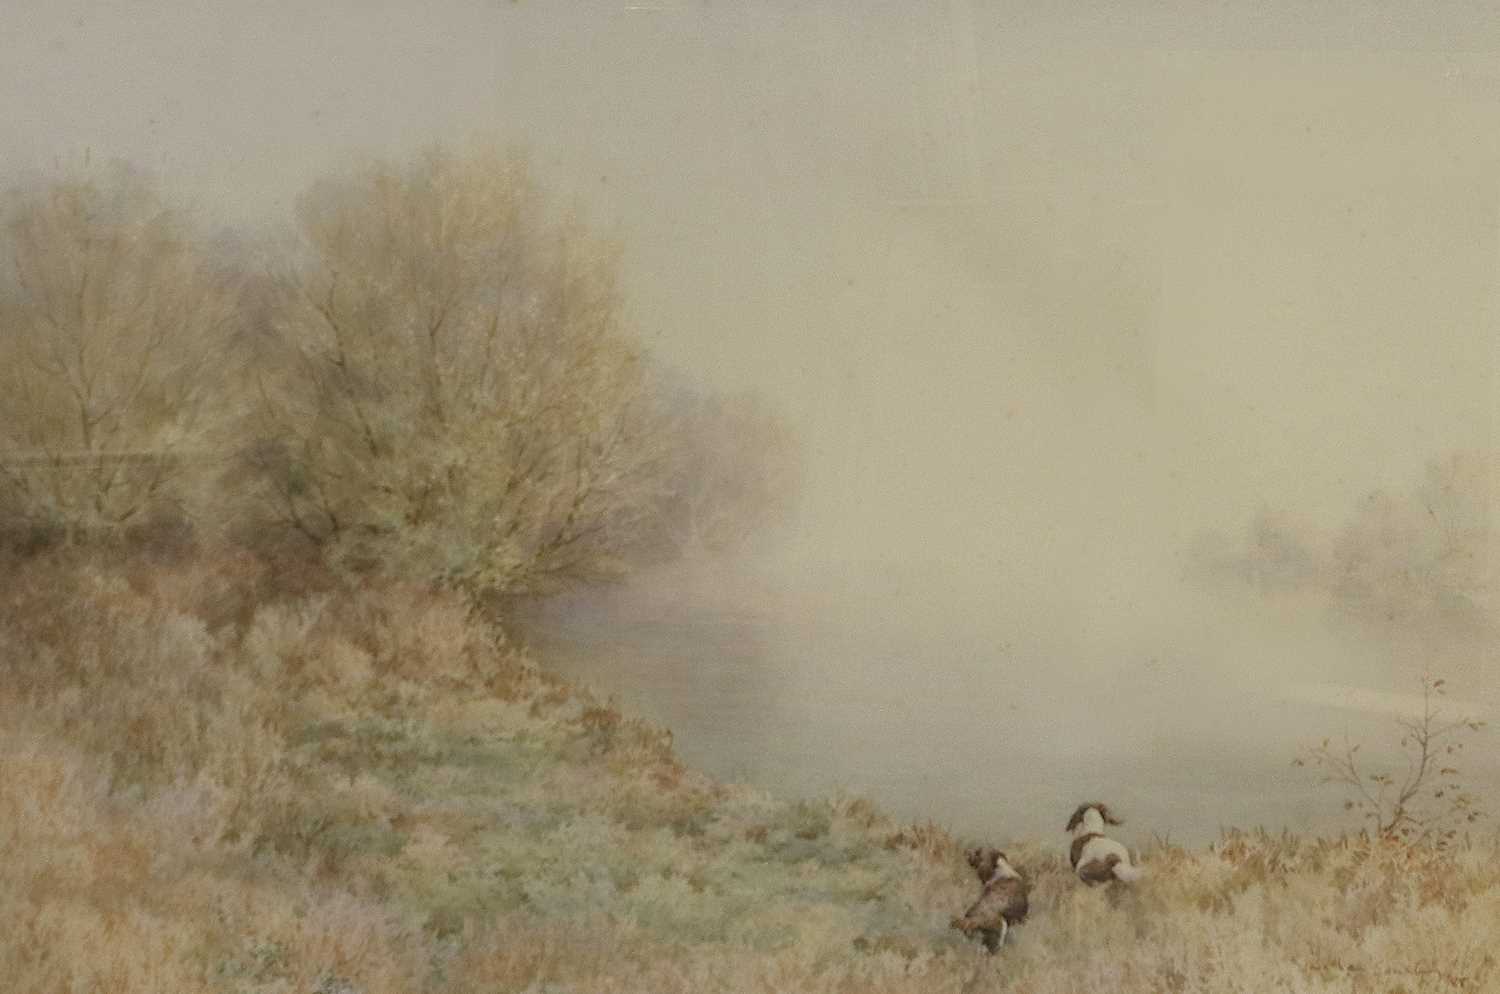 Jonathan Sainsbury (b.1951) "Mist on the Avon, Springer Spaniels" Signed and dated (19)88,